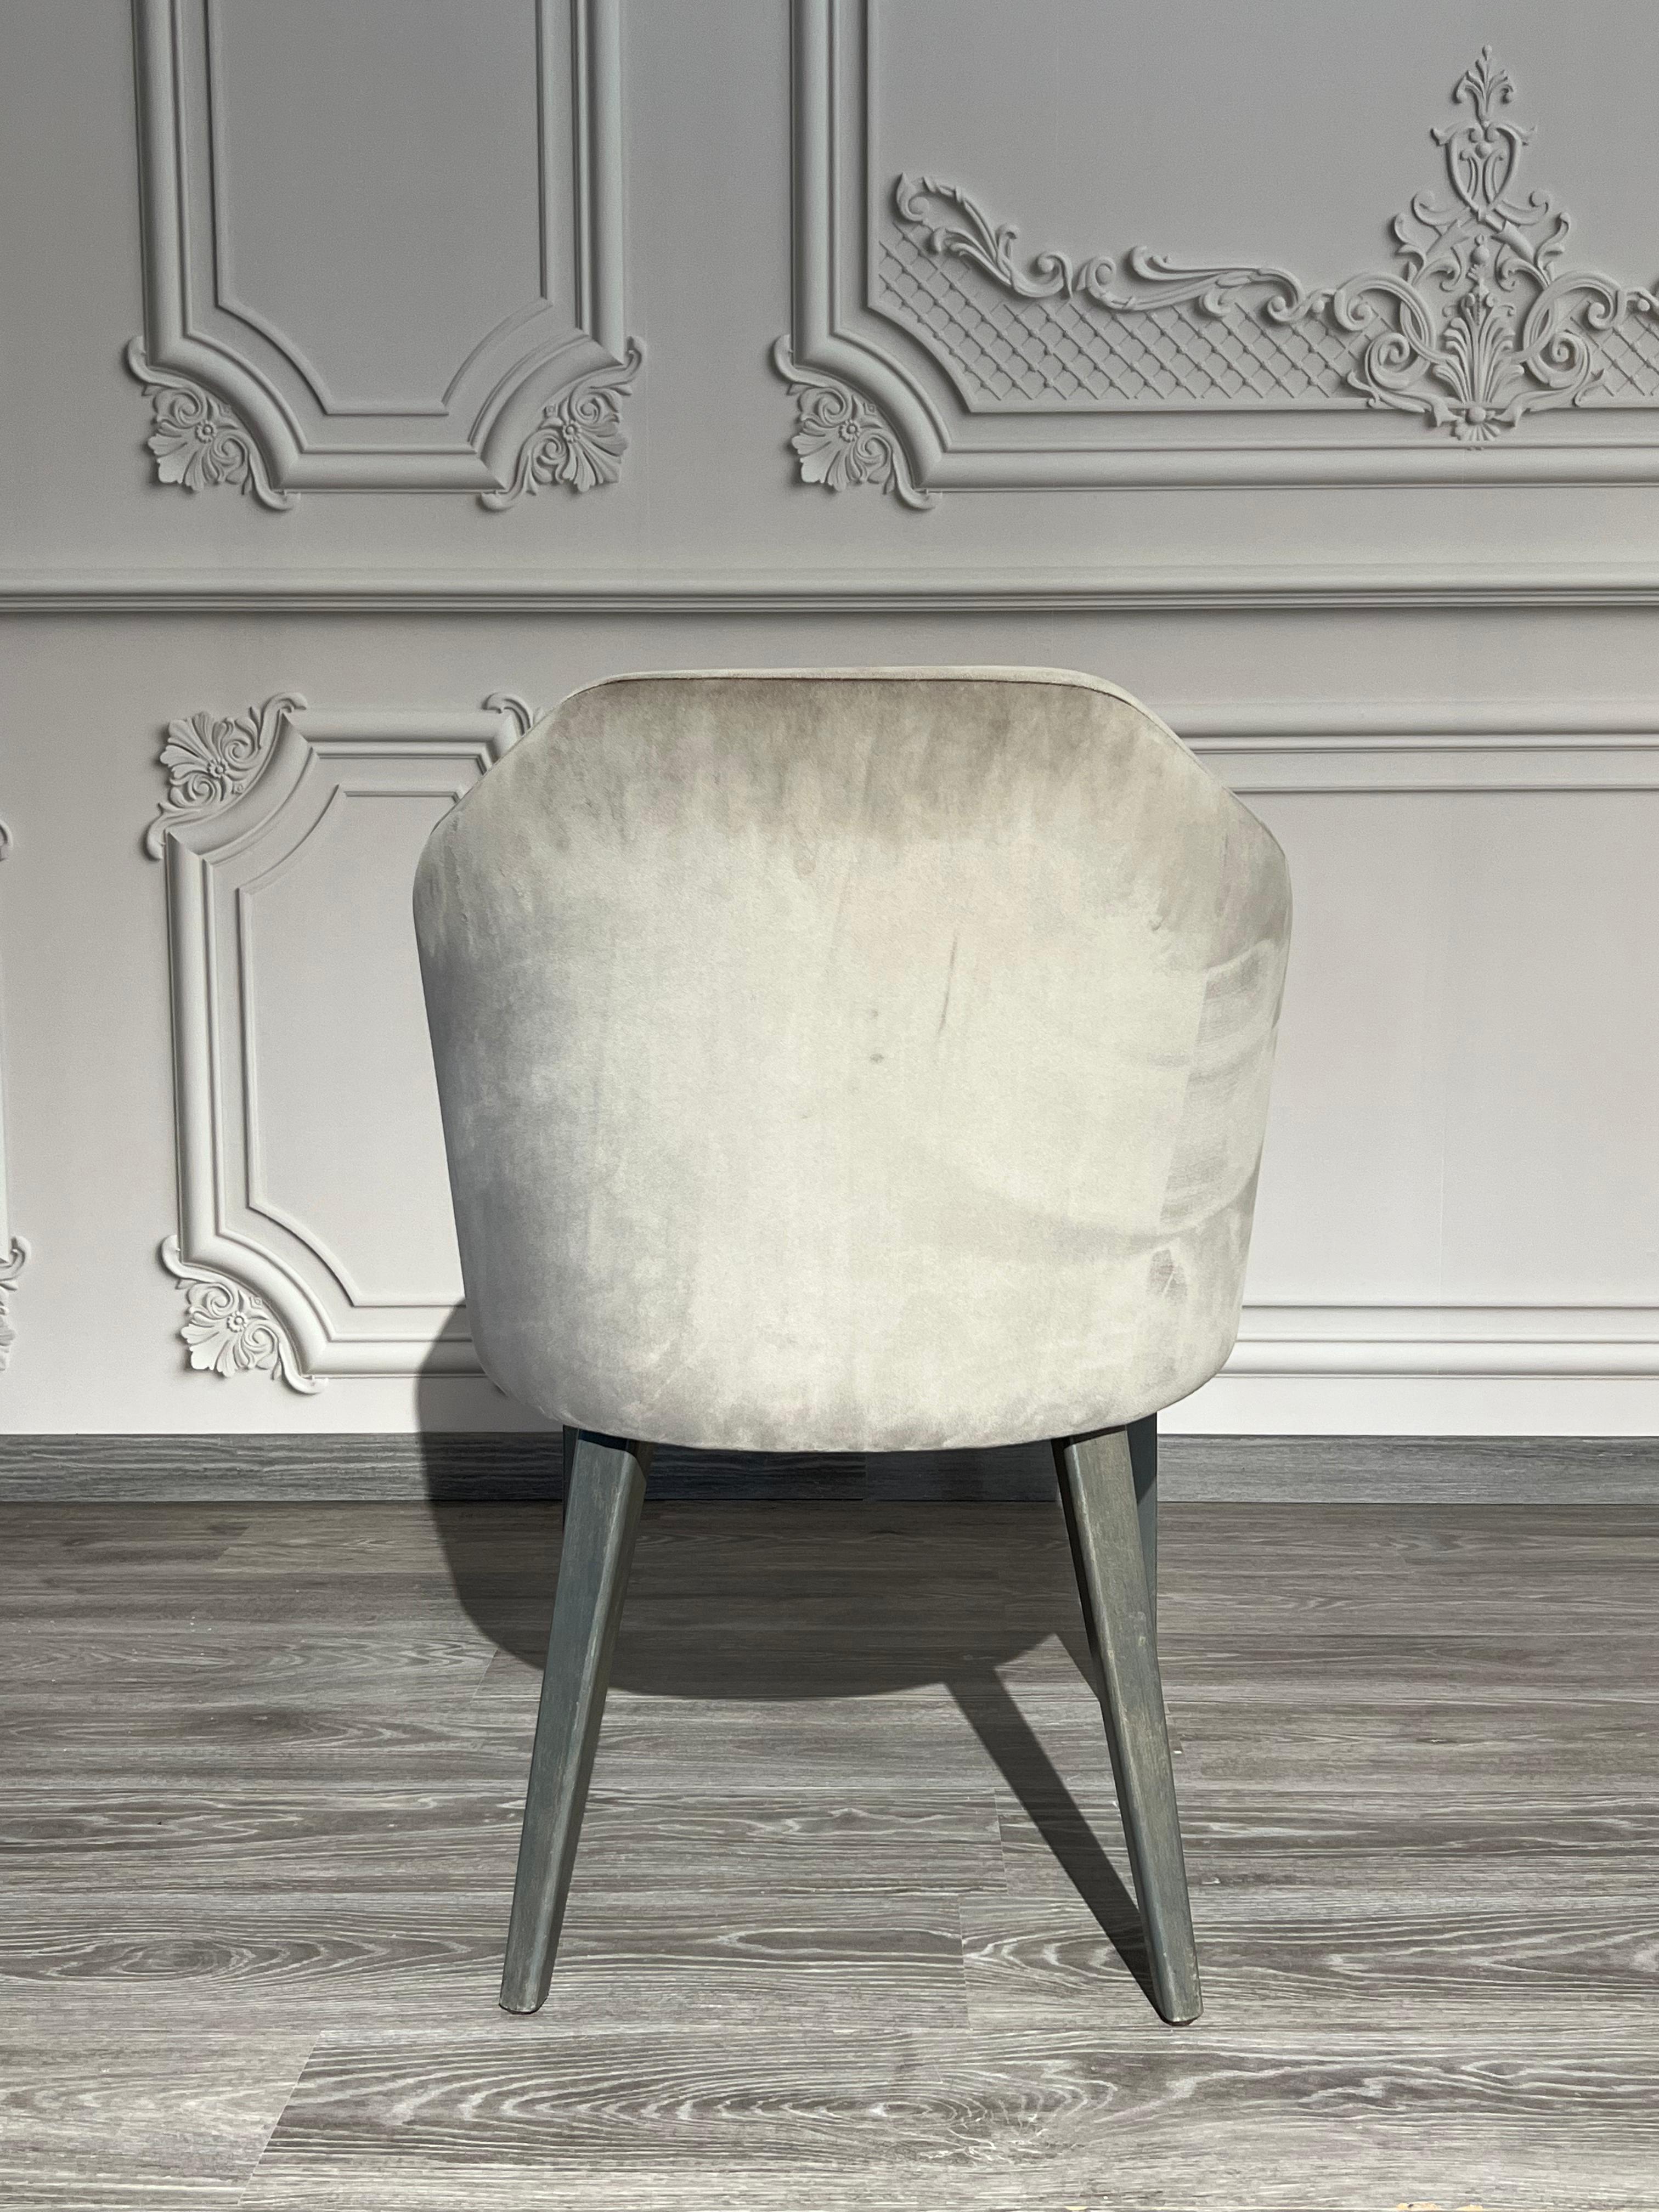 Armchair chair with upholstered backs and arms. From high comfort and design. Harvey dining chair available in 6-piece velvet gray color.

Customizable in your choice of our leather, fabric or velvet upholstery.
